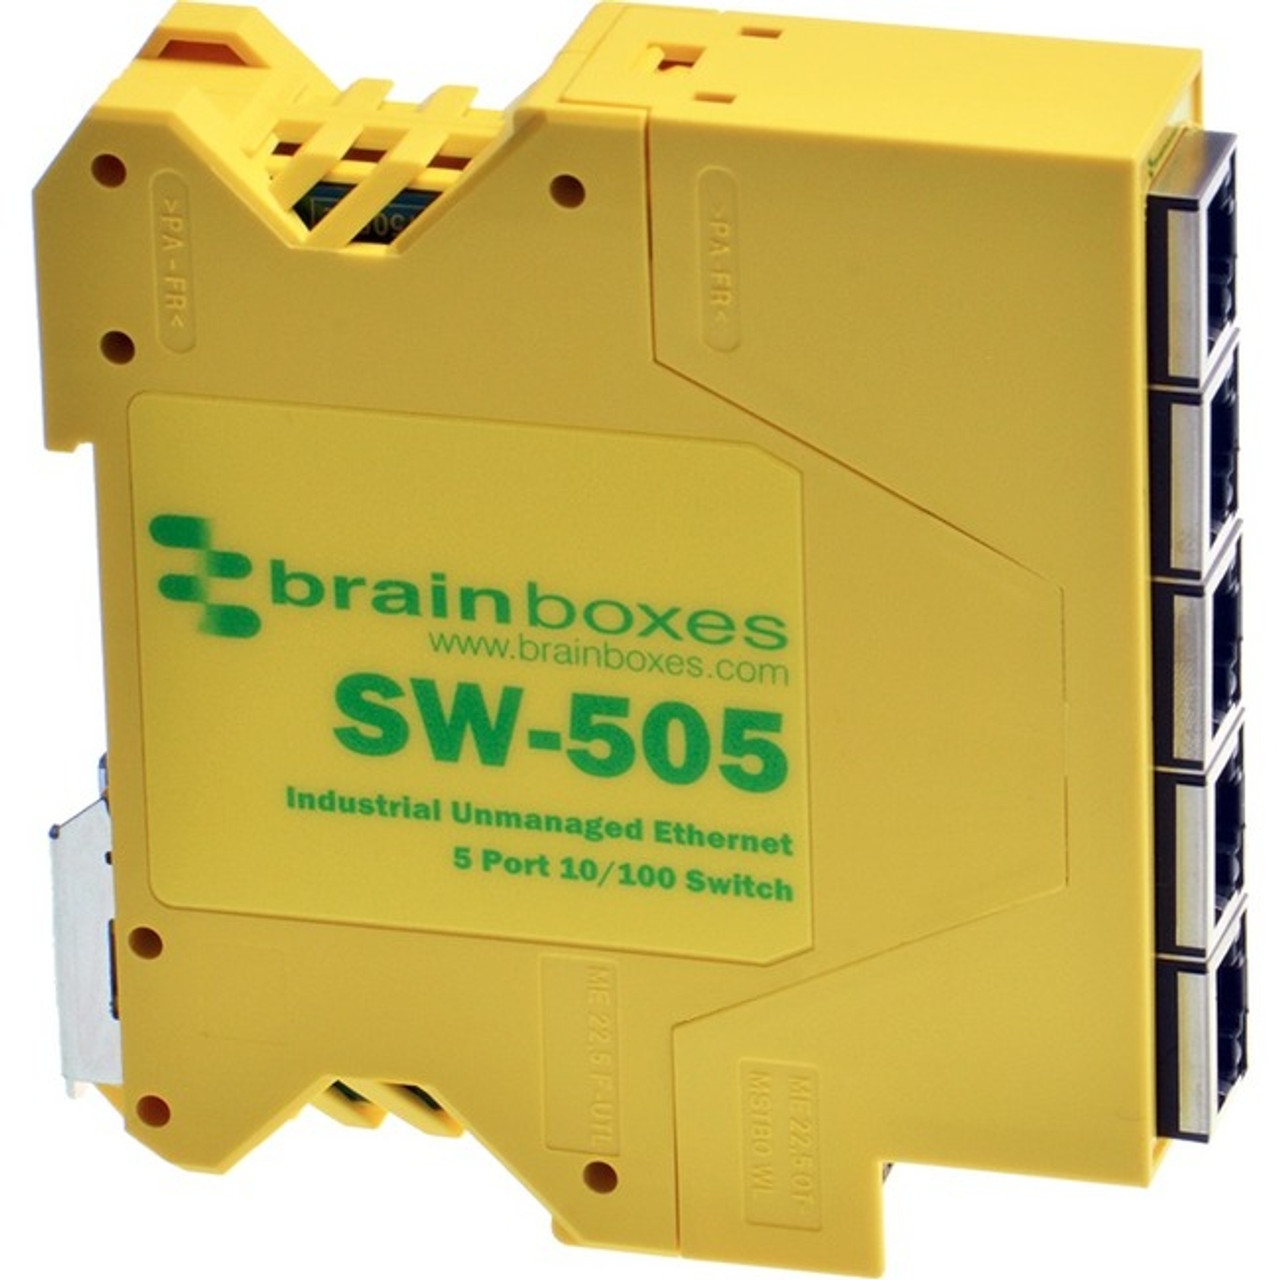 Brainboxes Industrial Compact Ethernet 5 Port Switch DIN Rail Mountable